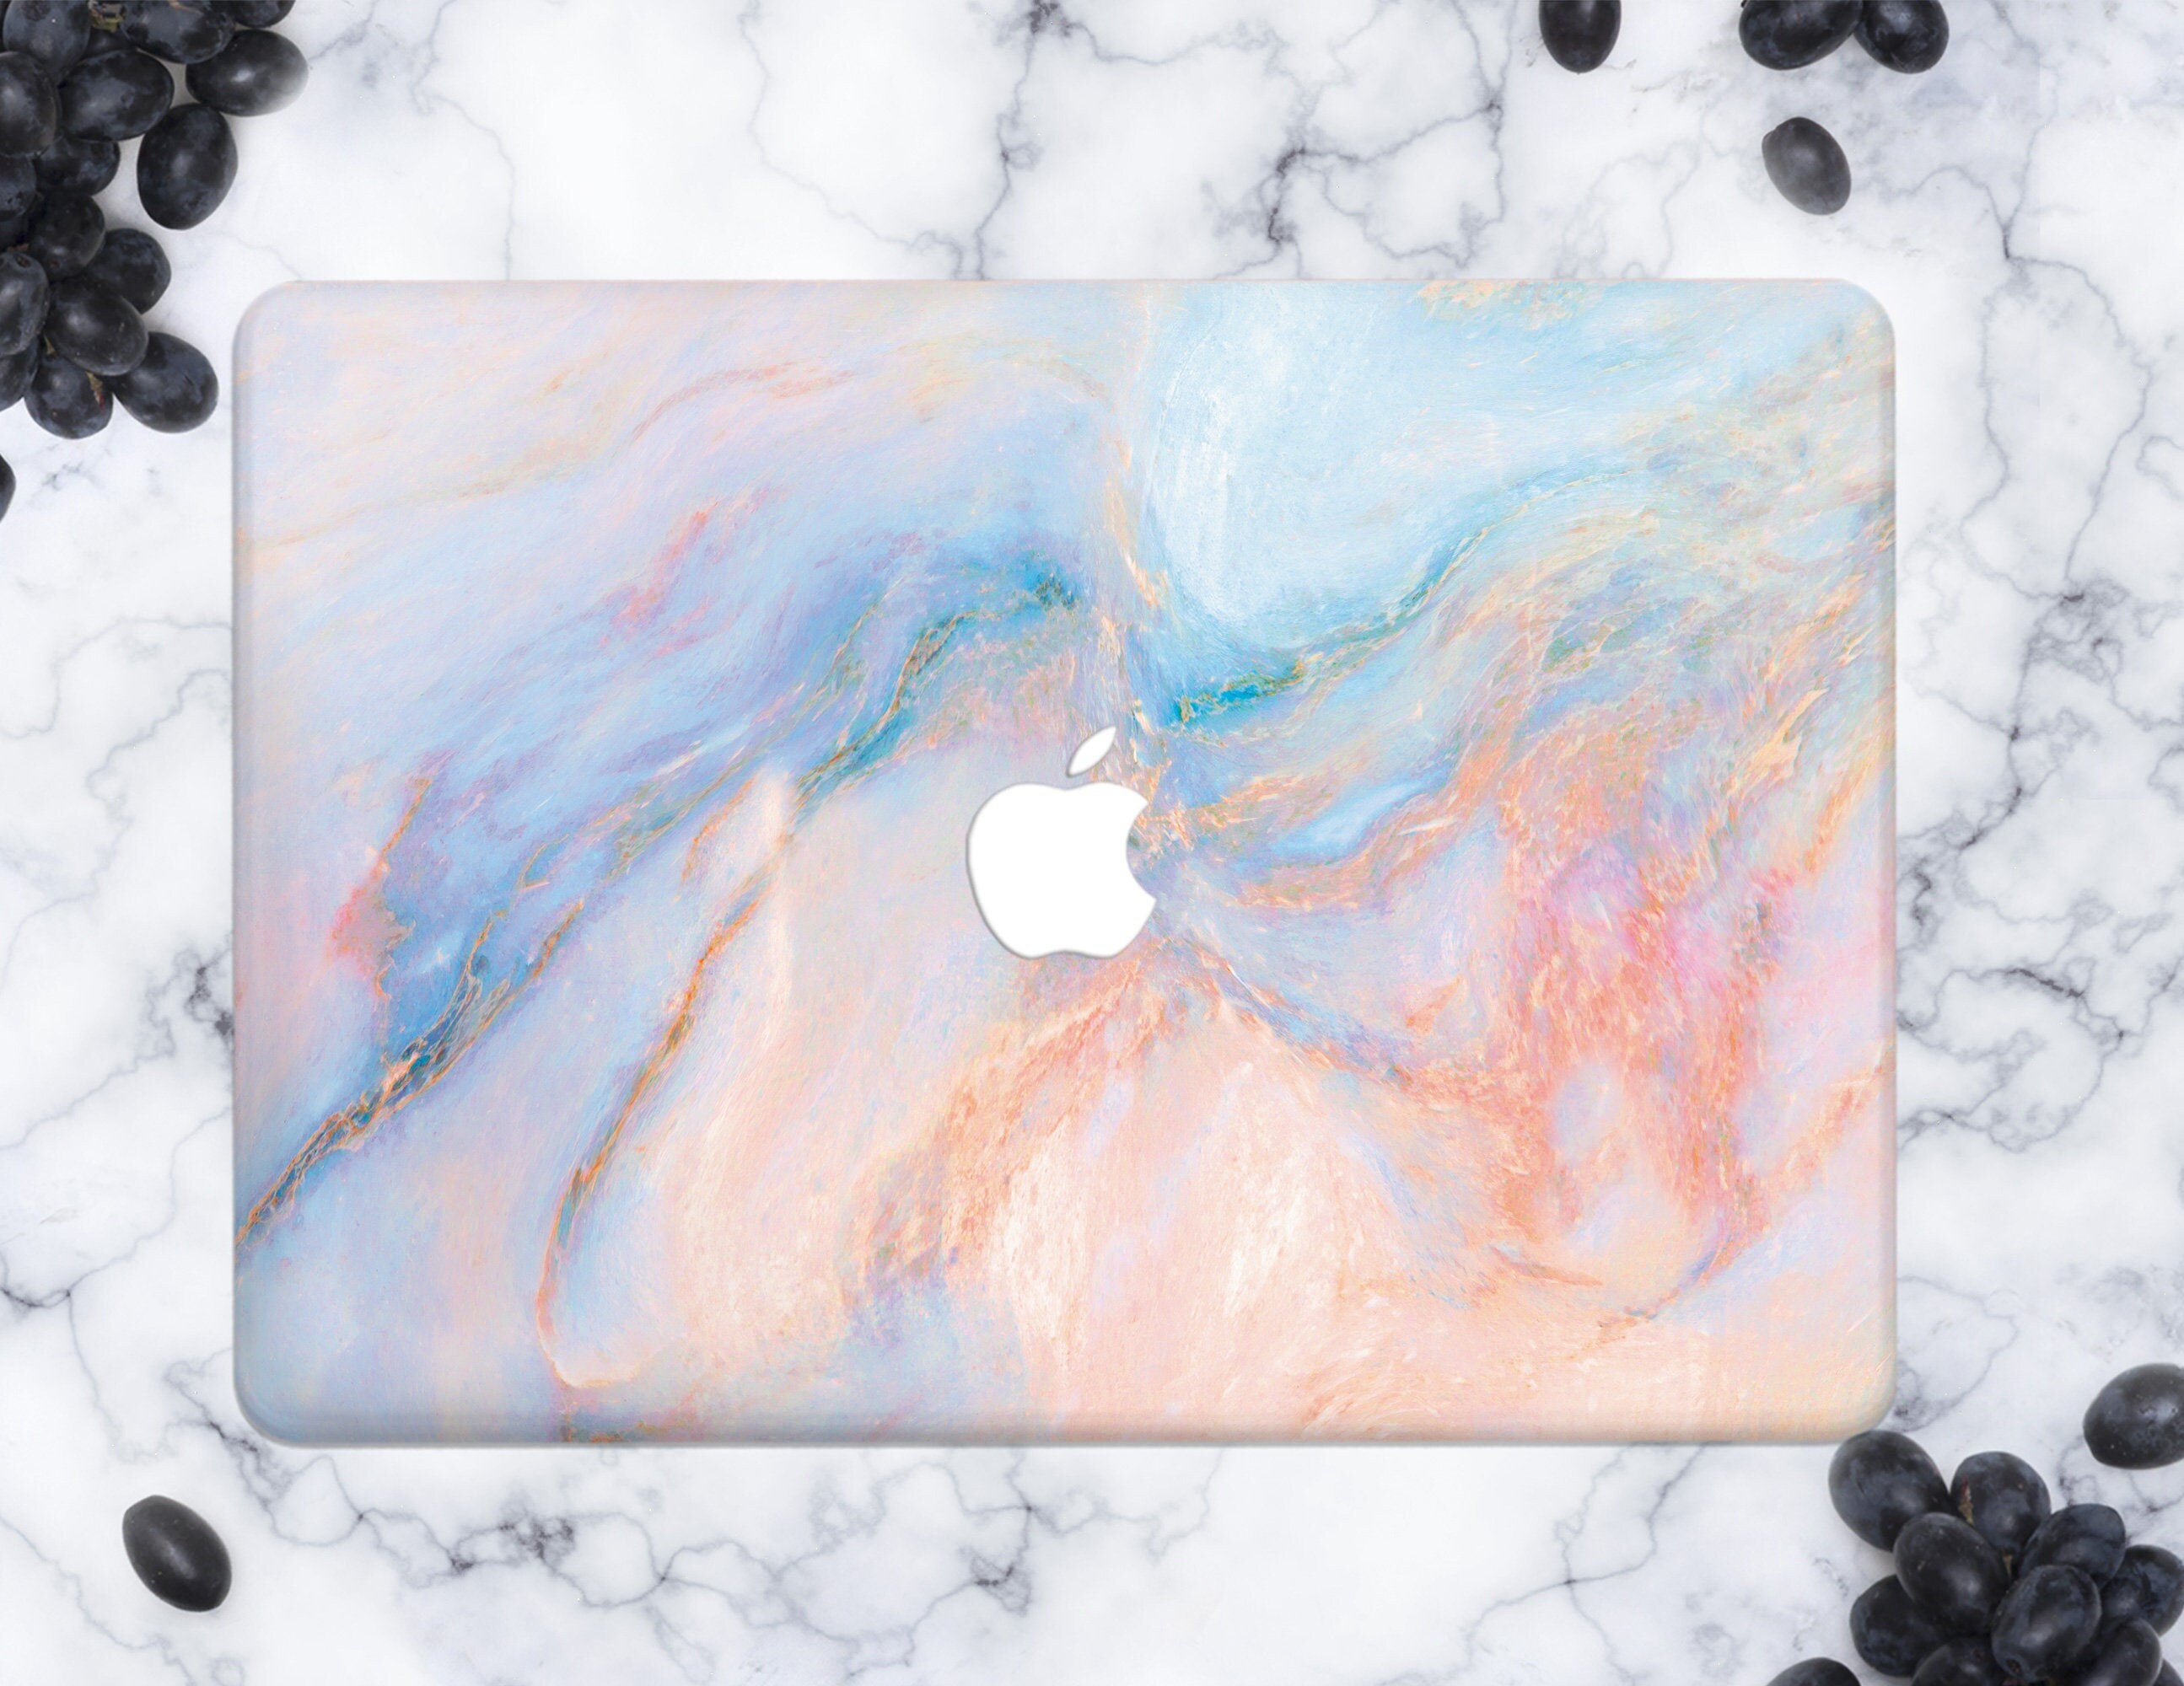 Colorful Science Signs Gold Rose Gold Hard Plastic Glitter Case Cover For Apple Macbook Air 11 13 Macbook 12 Macbook Pro 13 15 Inch 2016 2017 2018 With Retina Display Touch Bar 